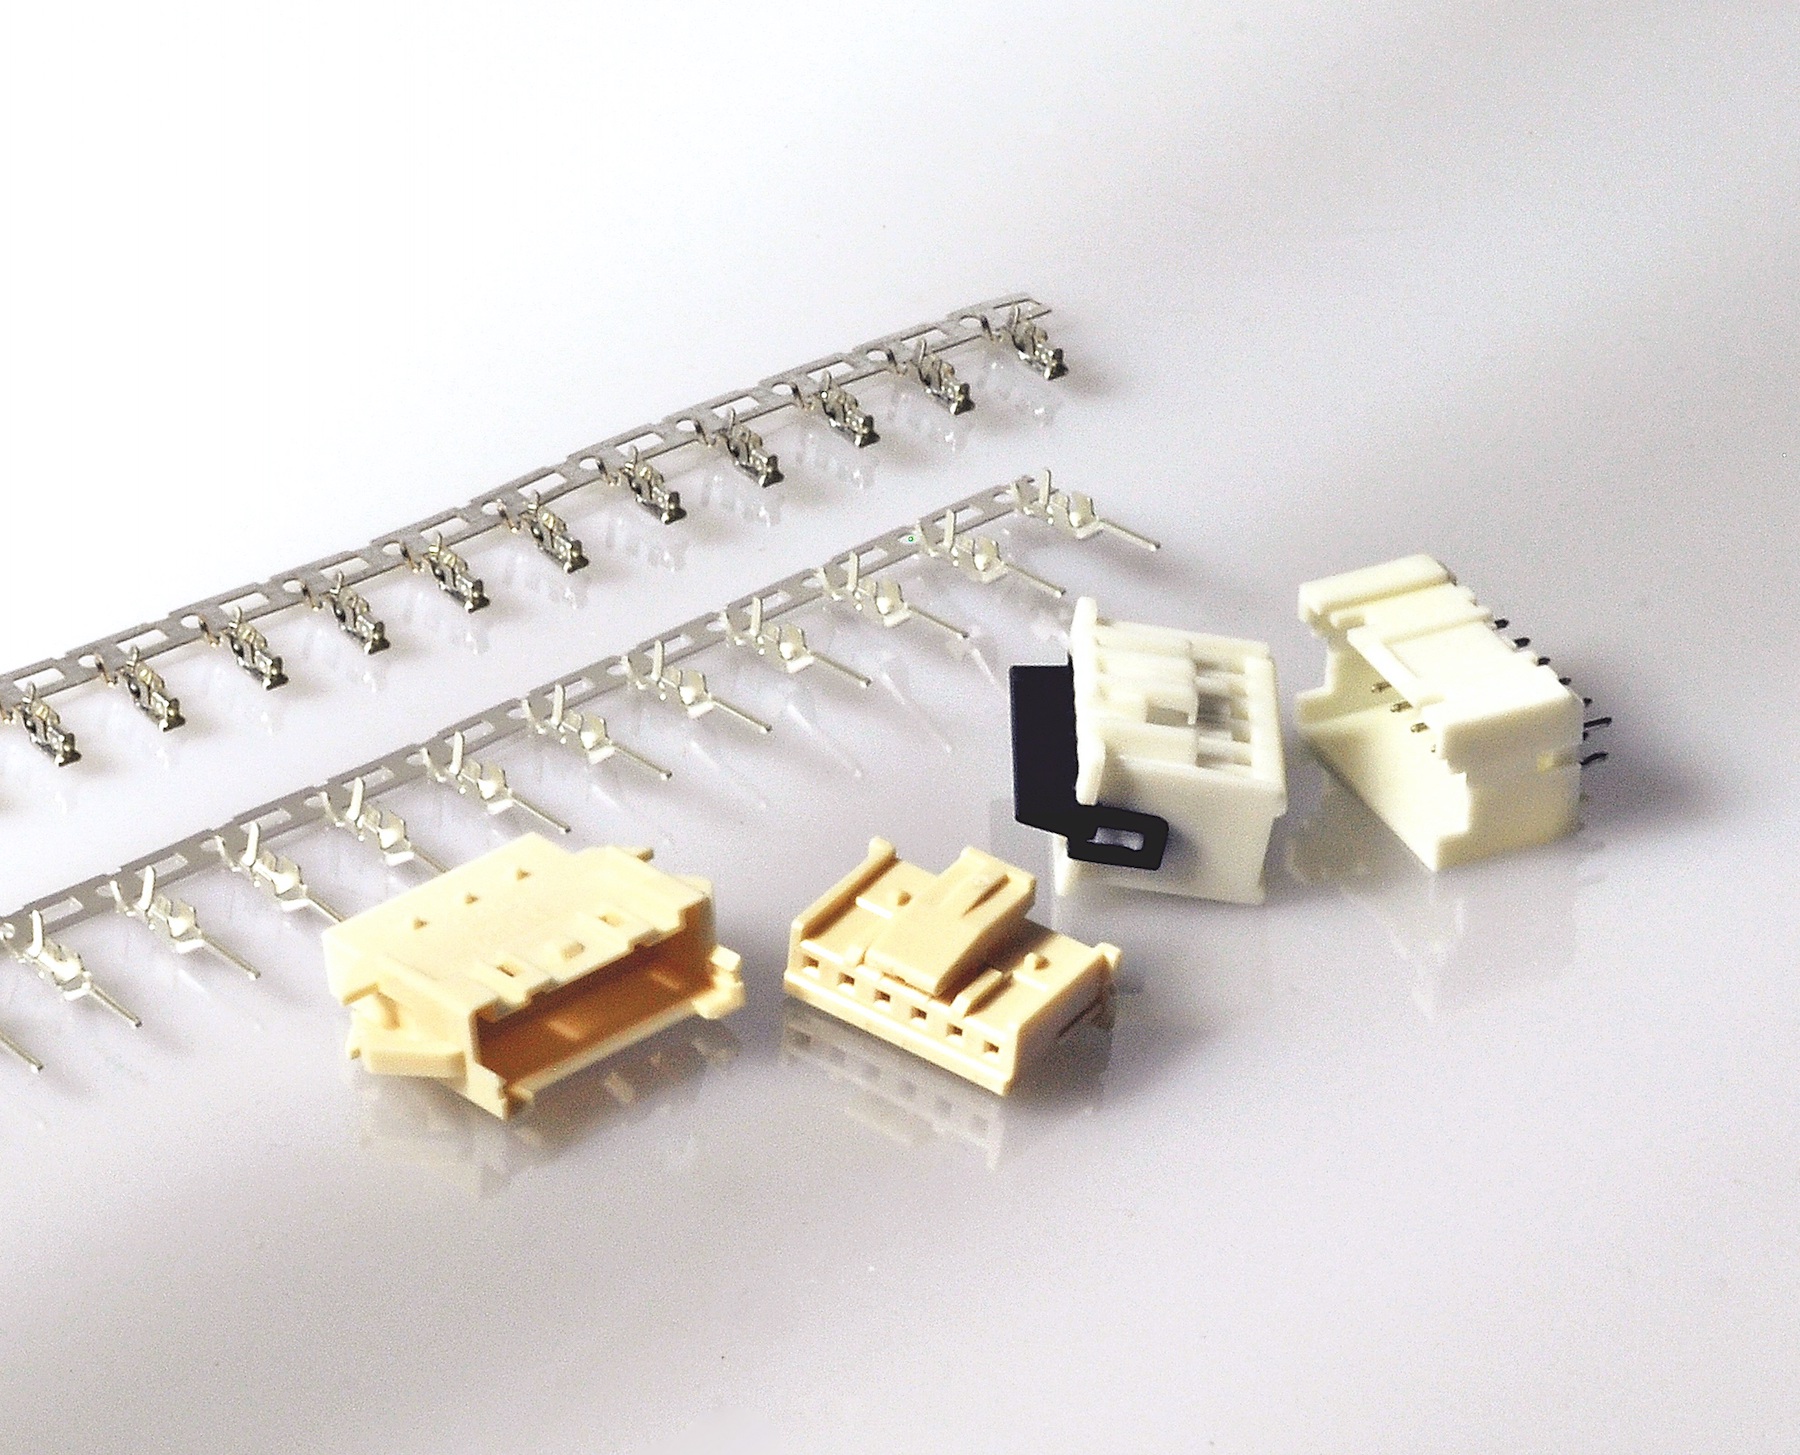 sensor-input connector products from TE Connectivity